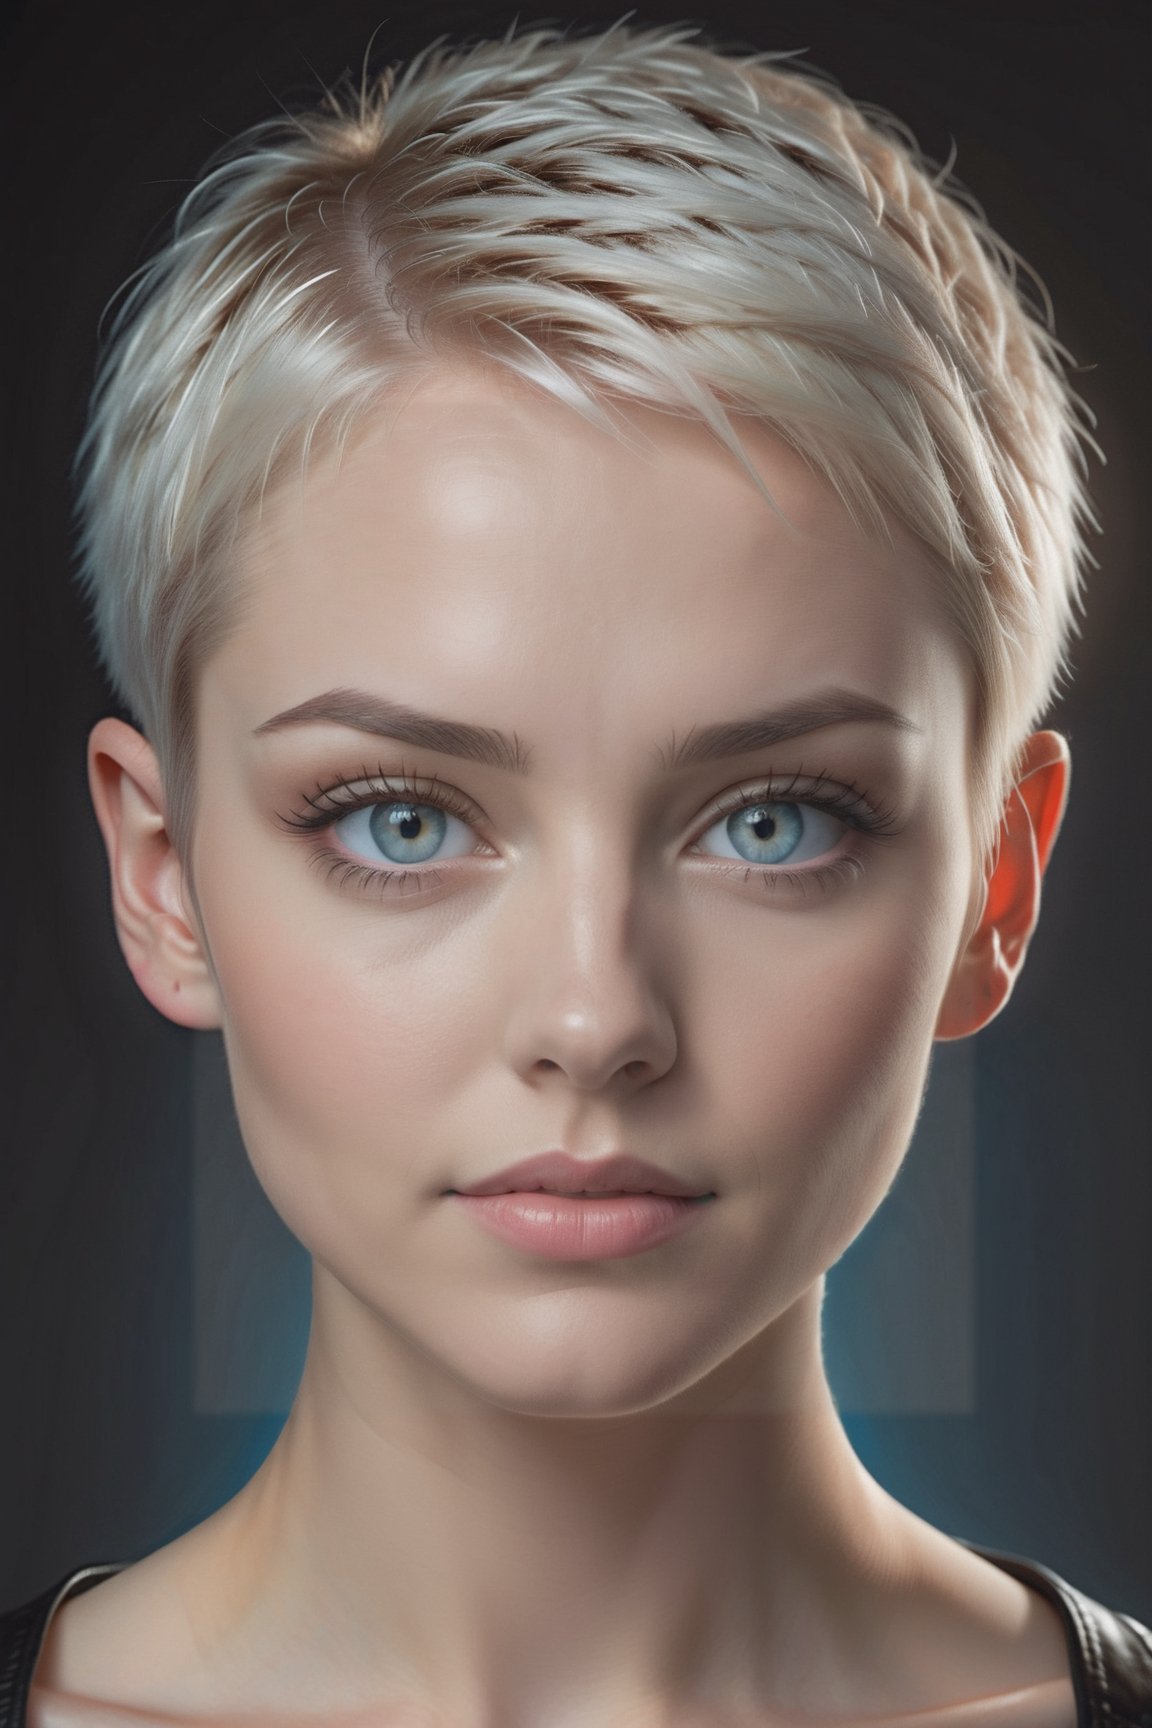 upper body portrait, (((masterpiece))),(((best quality, realistic)))
((ultra-detailed)),(detailed light)
((an extremely delicate and beautiful))
(blue eyes), 22yo dramatic lighting 1 girl
short pale hair, short pixie style
open forehead
full body black leather